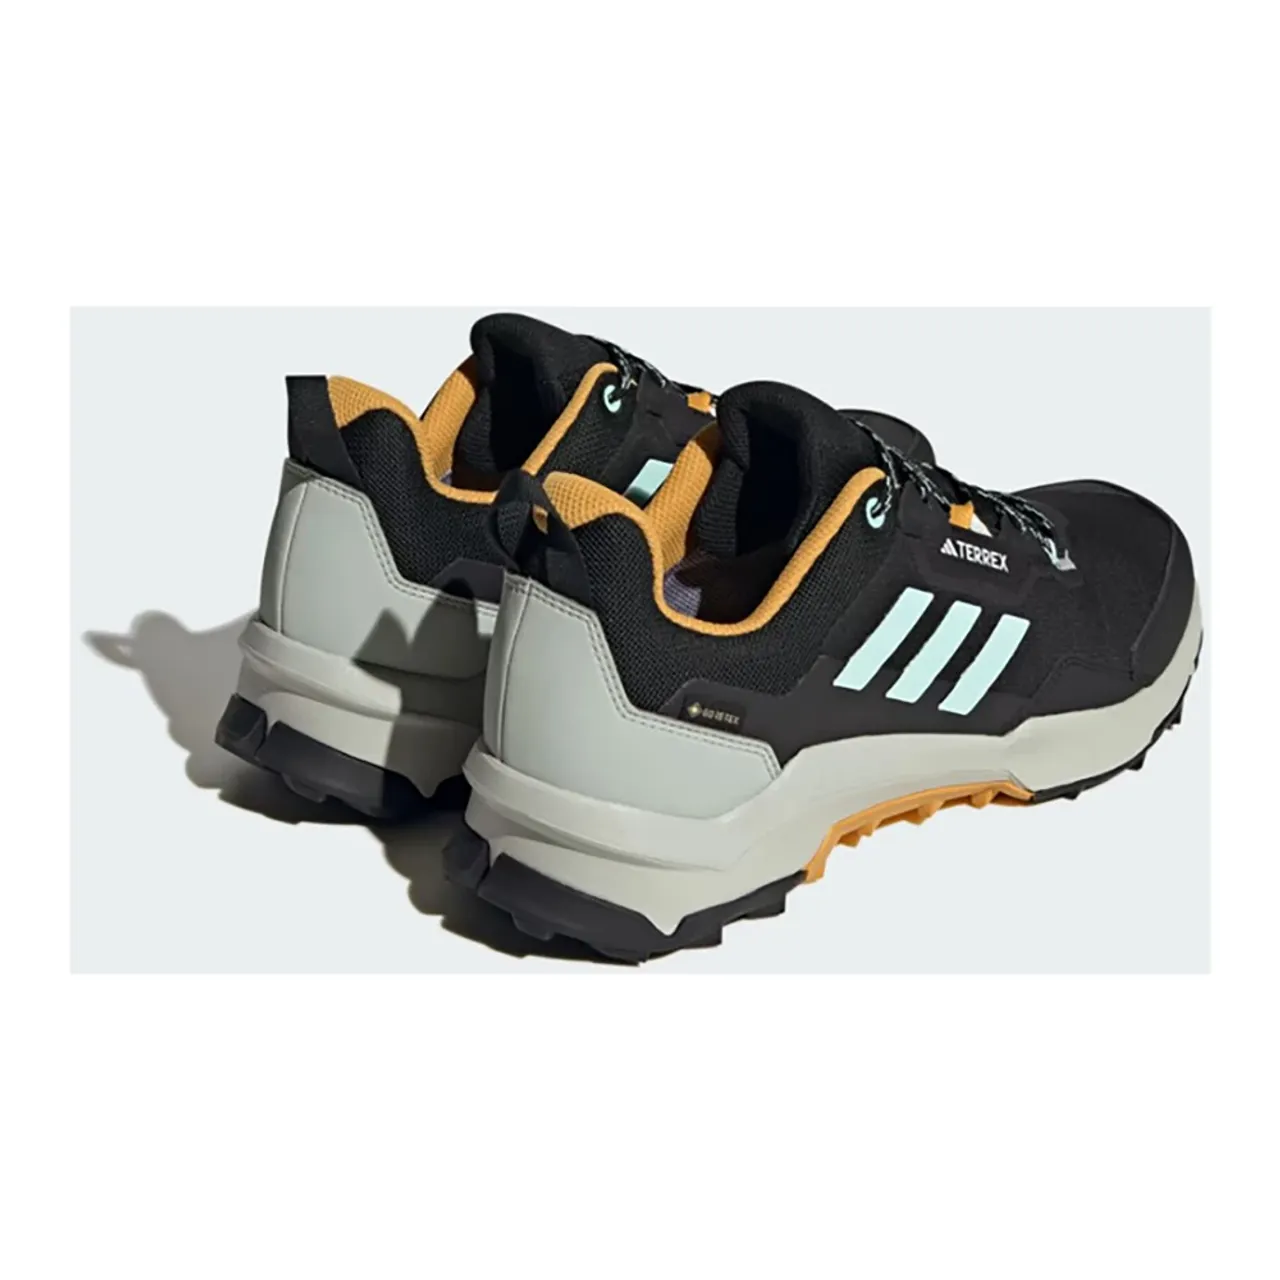 Adidas , AX4 GTX Low Terrex Hiking Shoes ,Multicolor male, Sizes: